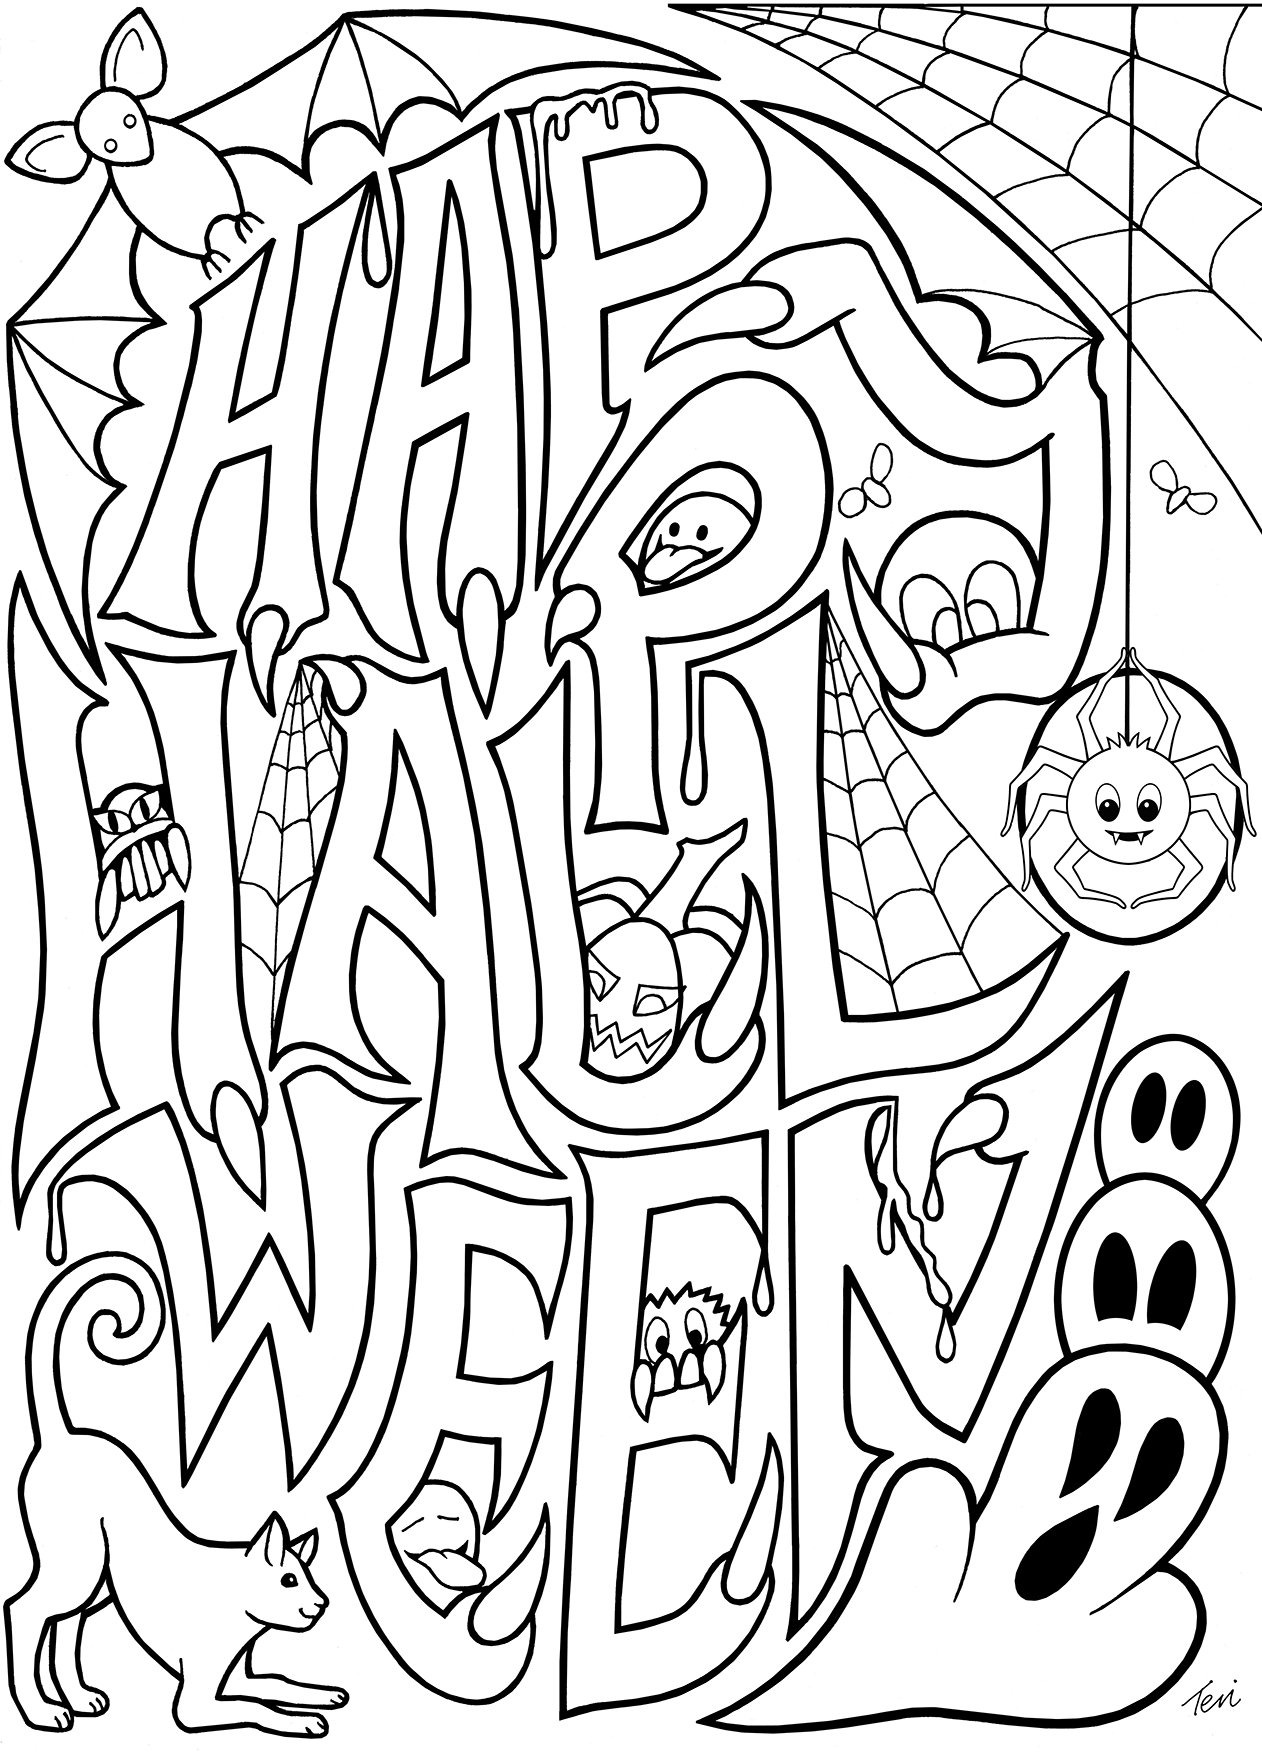 Free Printable Halloween Coloring Sheets For Adults